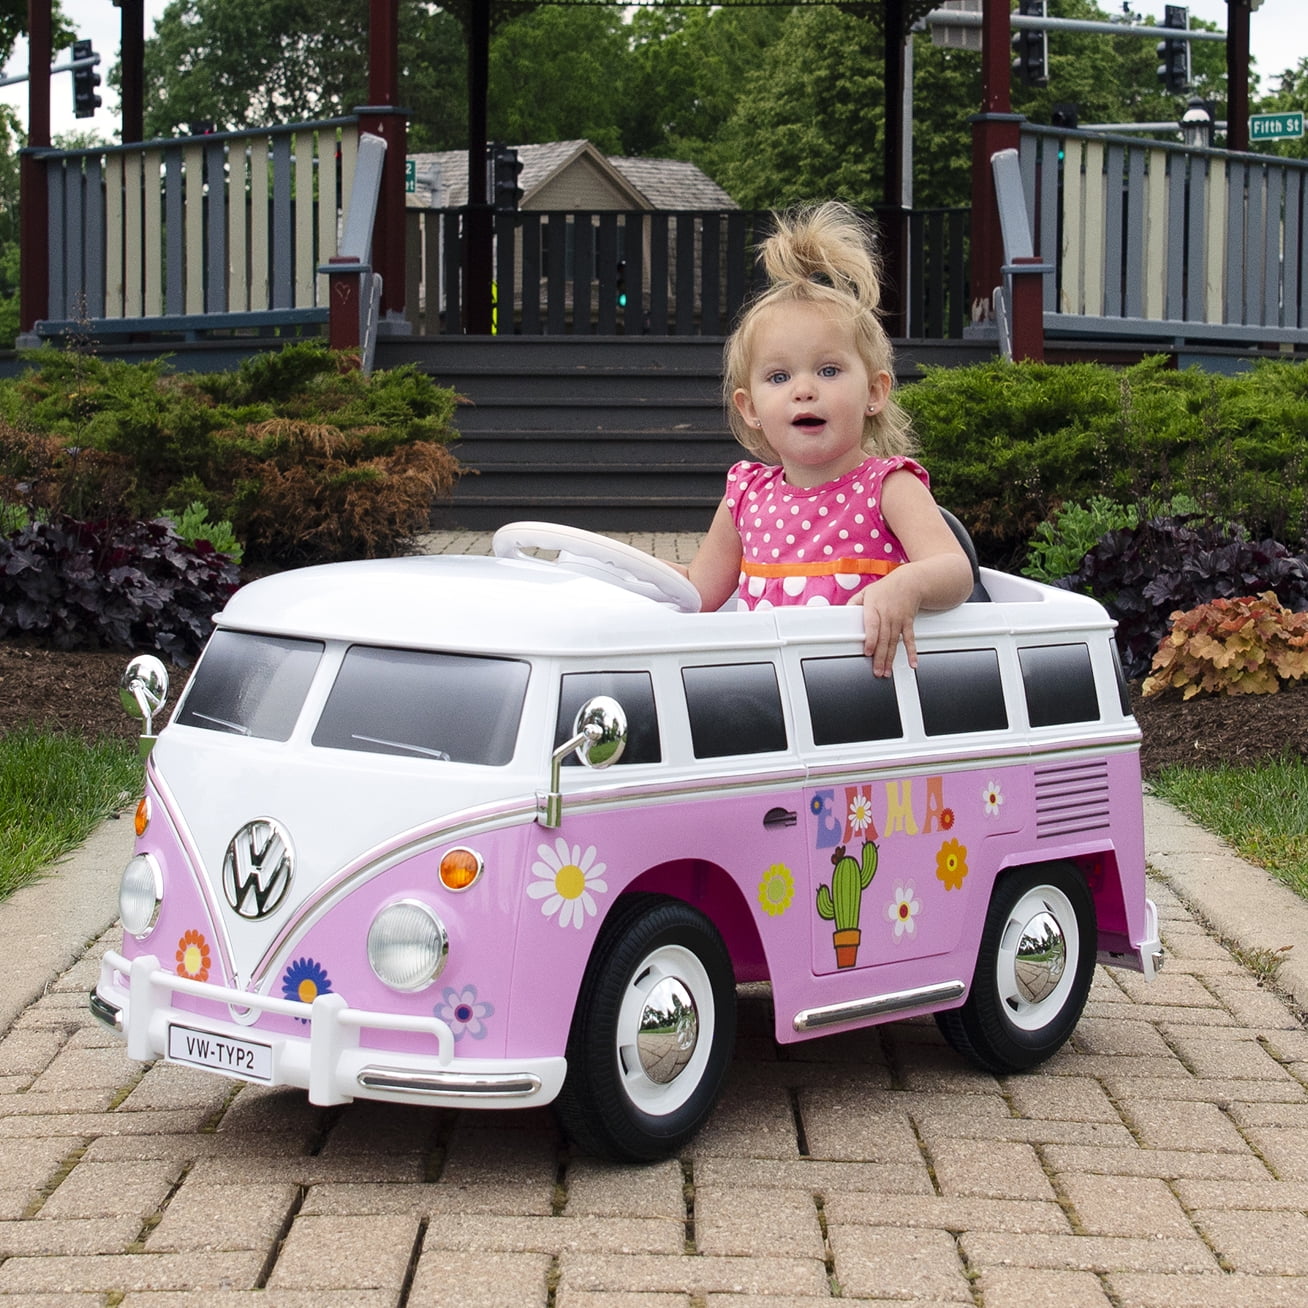 W487ACROB for sale online Rollplay 6V VW Battery Powered Bus Ride On Toy